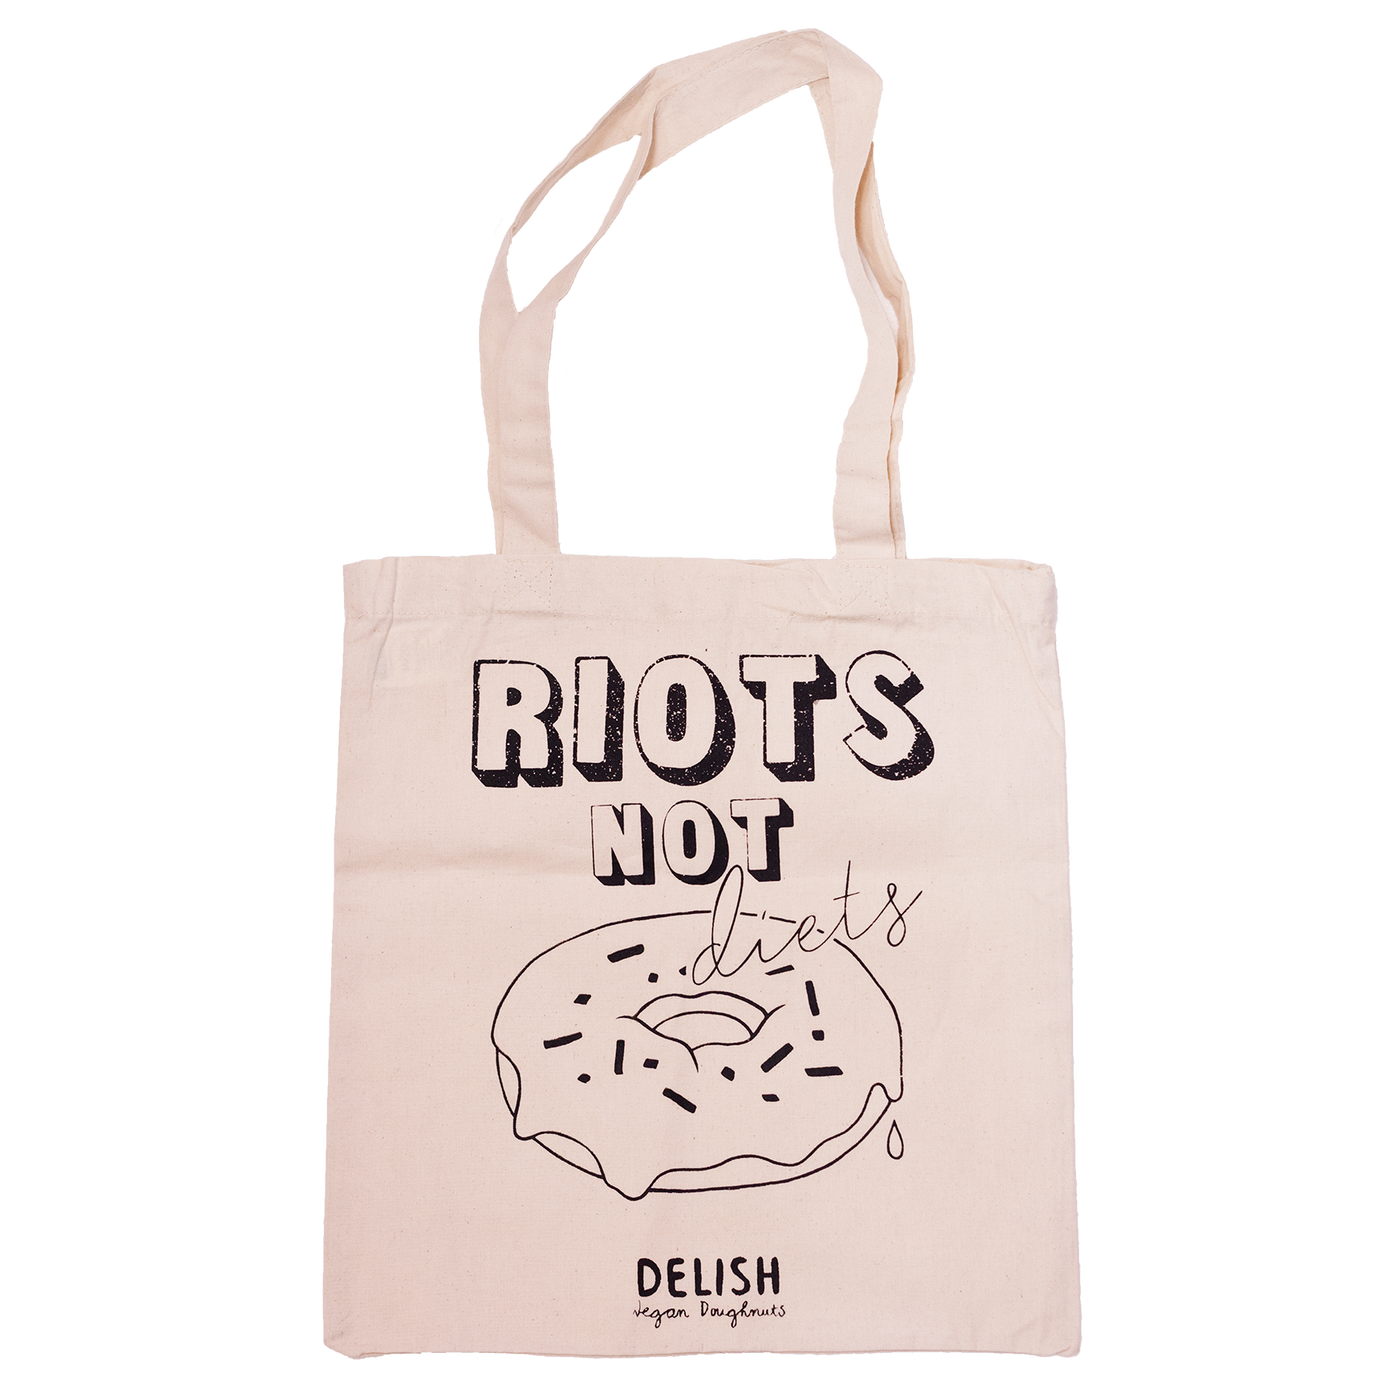 Totebag "Riots not diets"